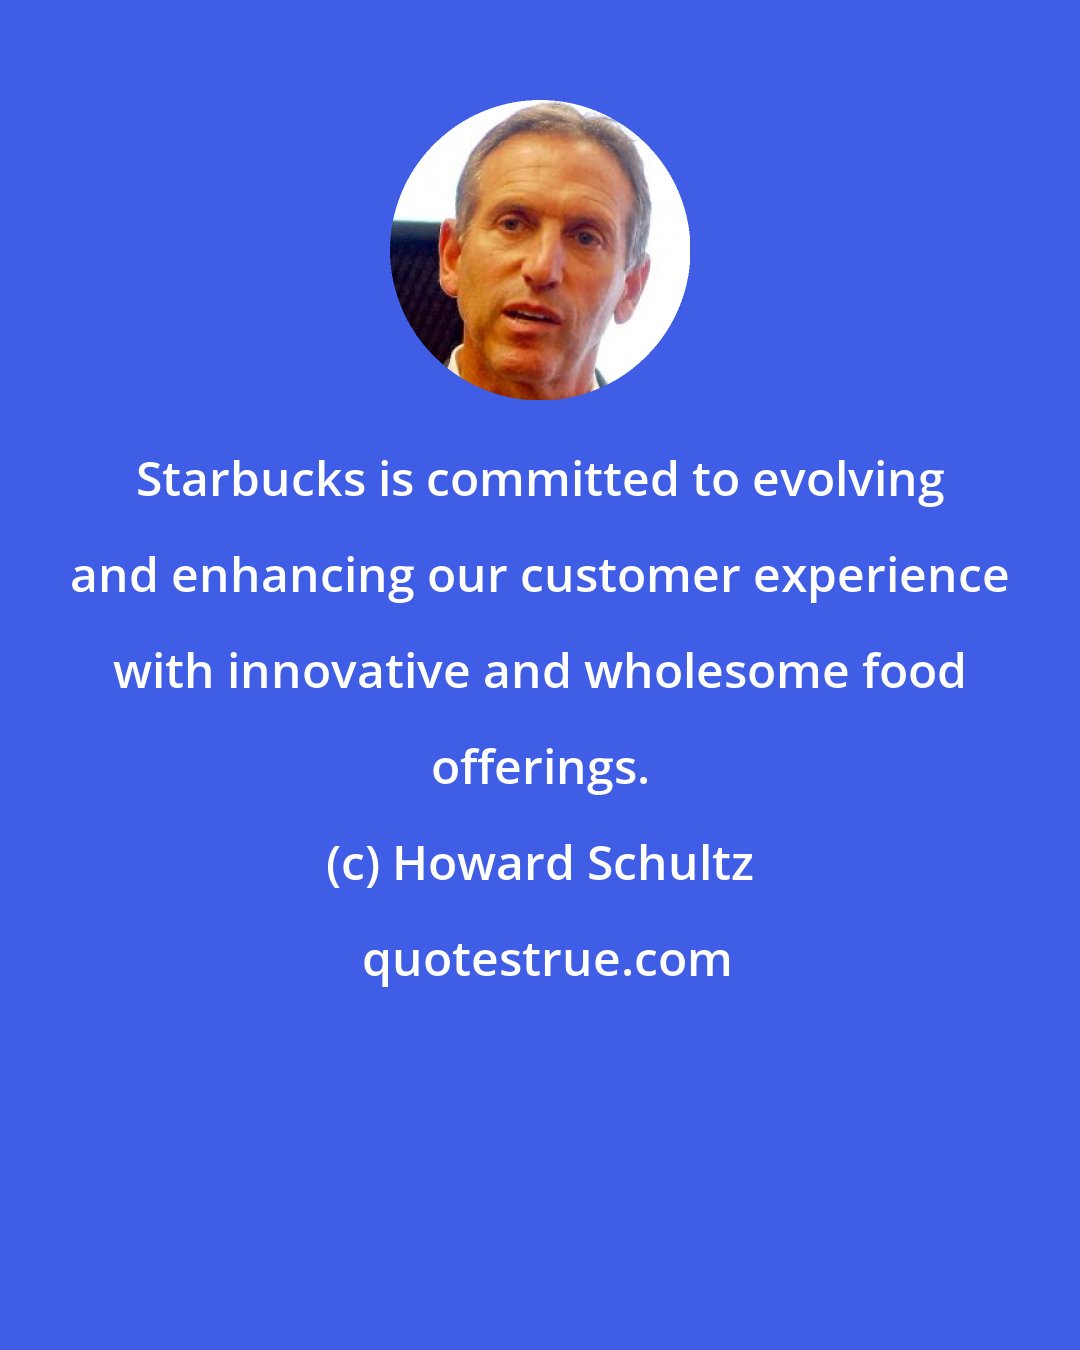 Howard Schultz: Starbucks is committed to evolving and enhancing our customer experience with innovative and wholesome food offerings.